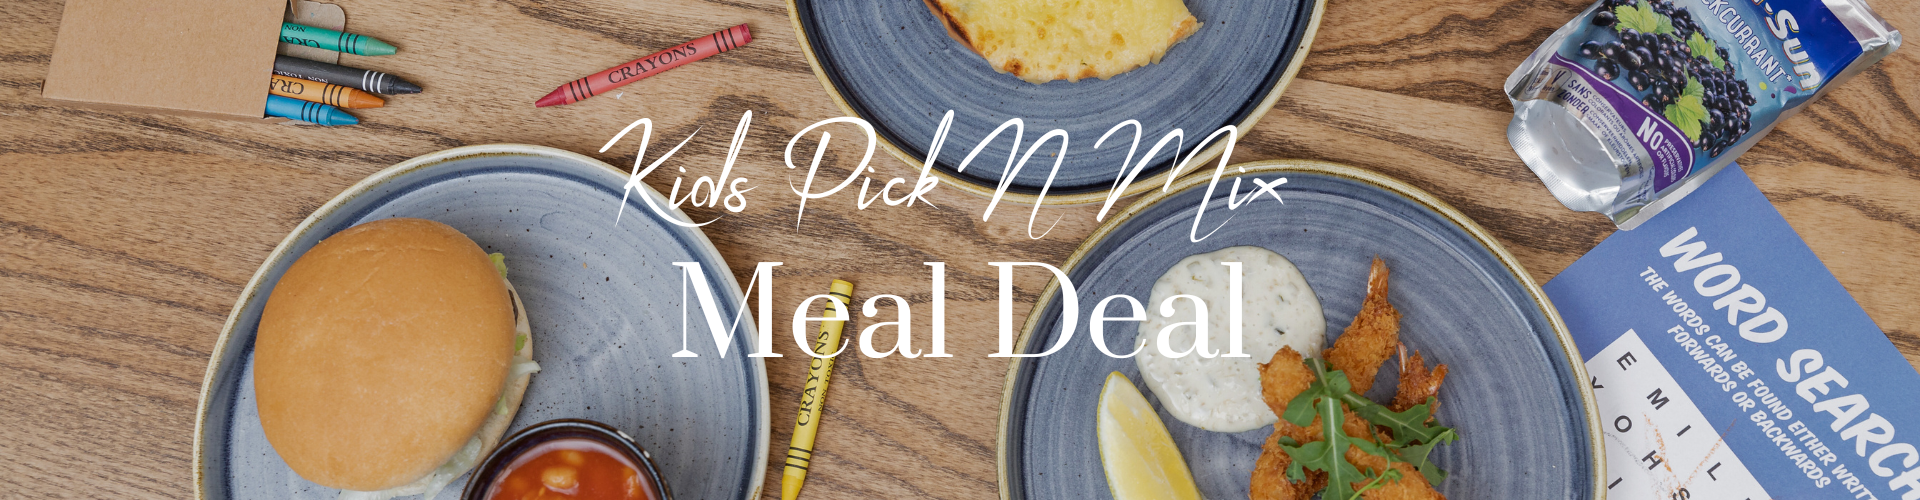 Kids Meal Deal available at West Port Hotel